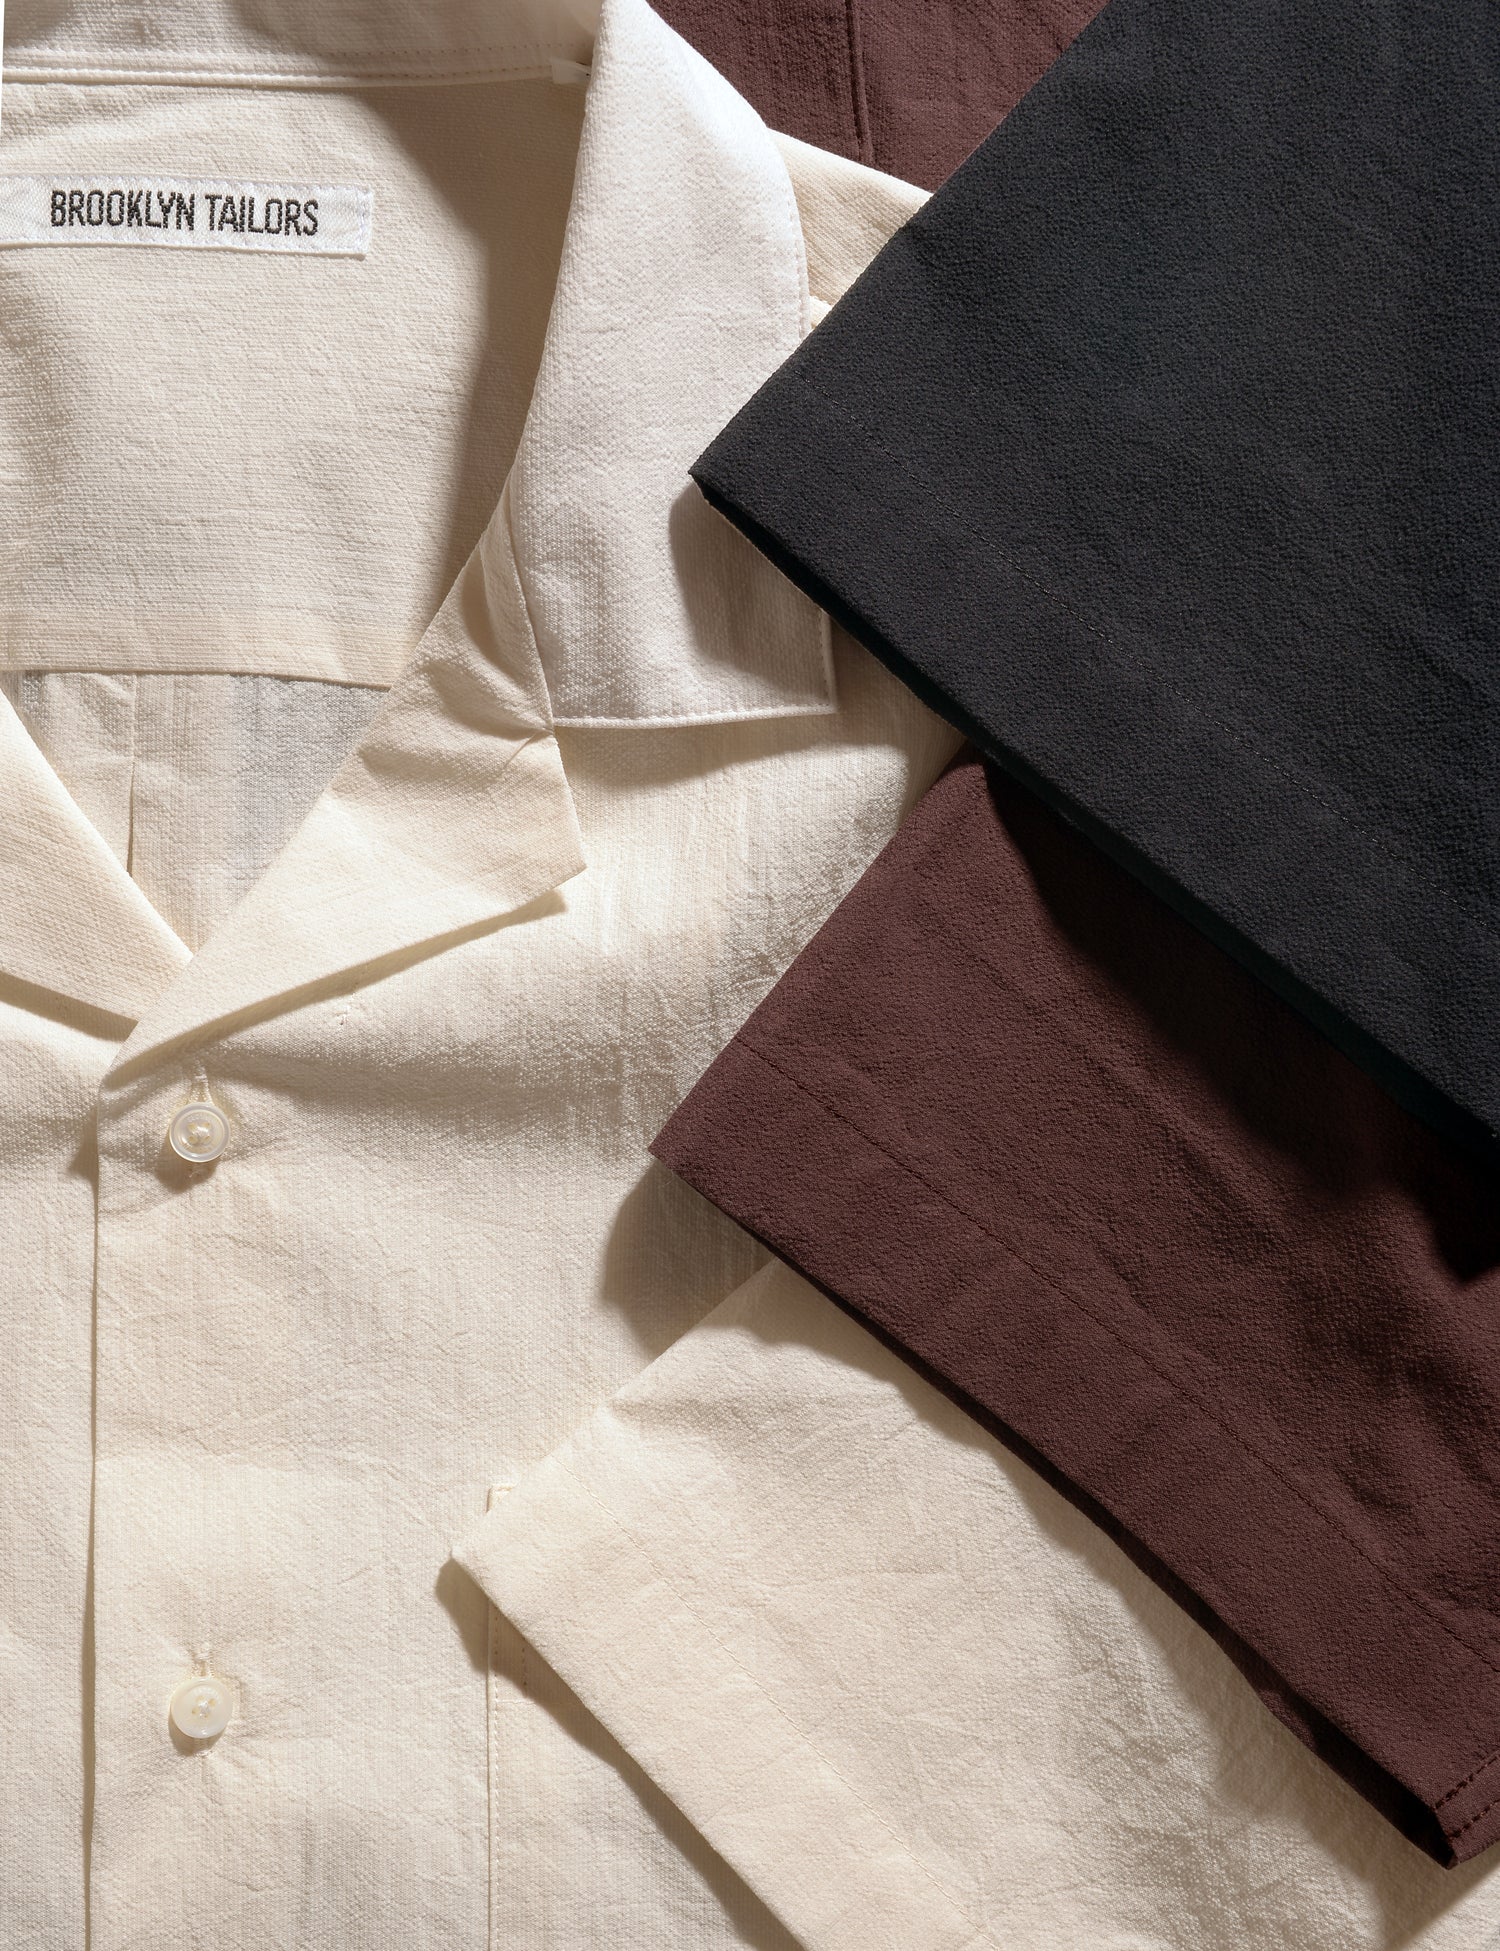 Close-up shot of three colors of Brooklyn Tailors BKT18 Camp Shirts in Crinkled Cotton showing sleeves, collar, and fabric texture